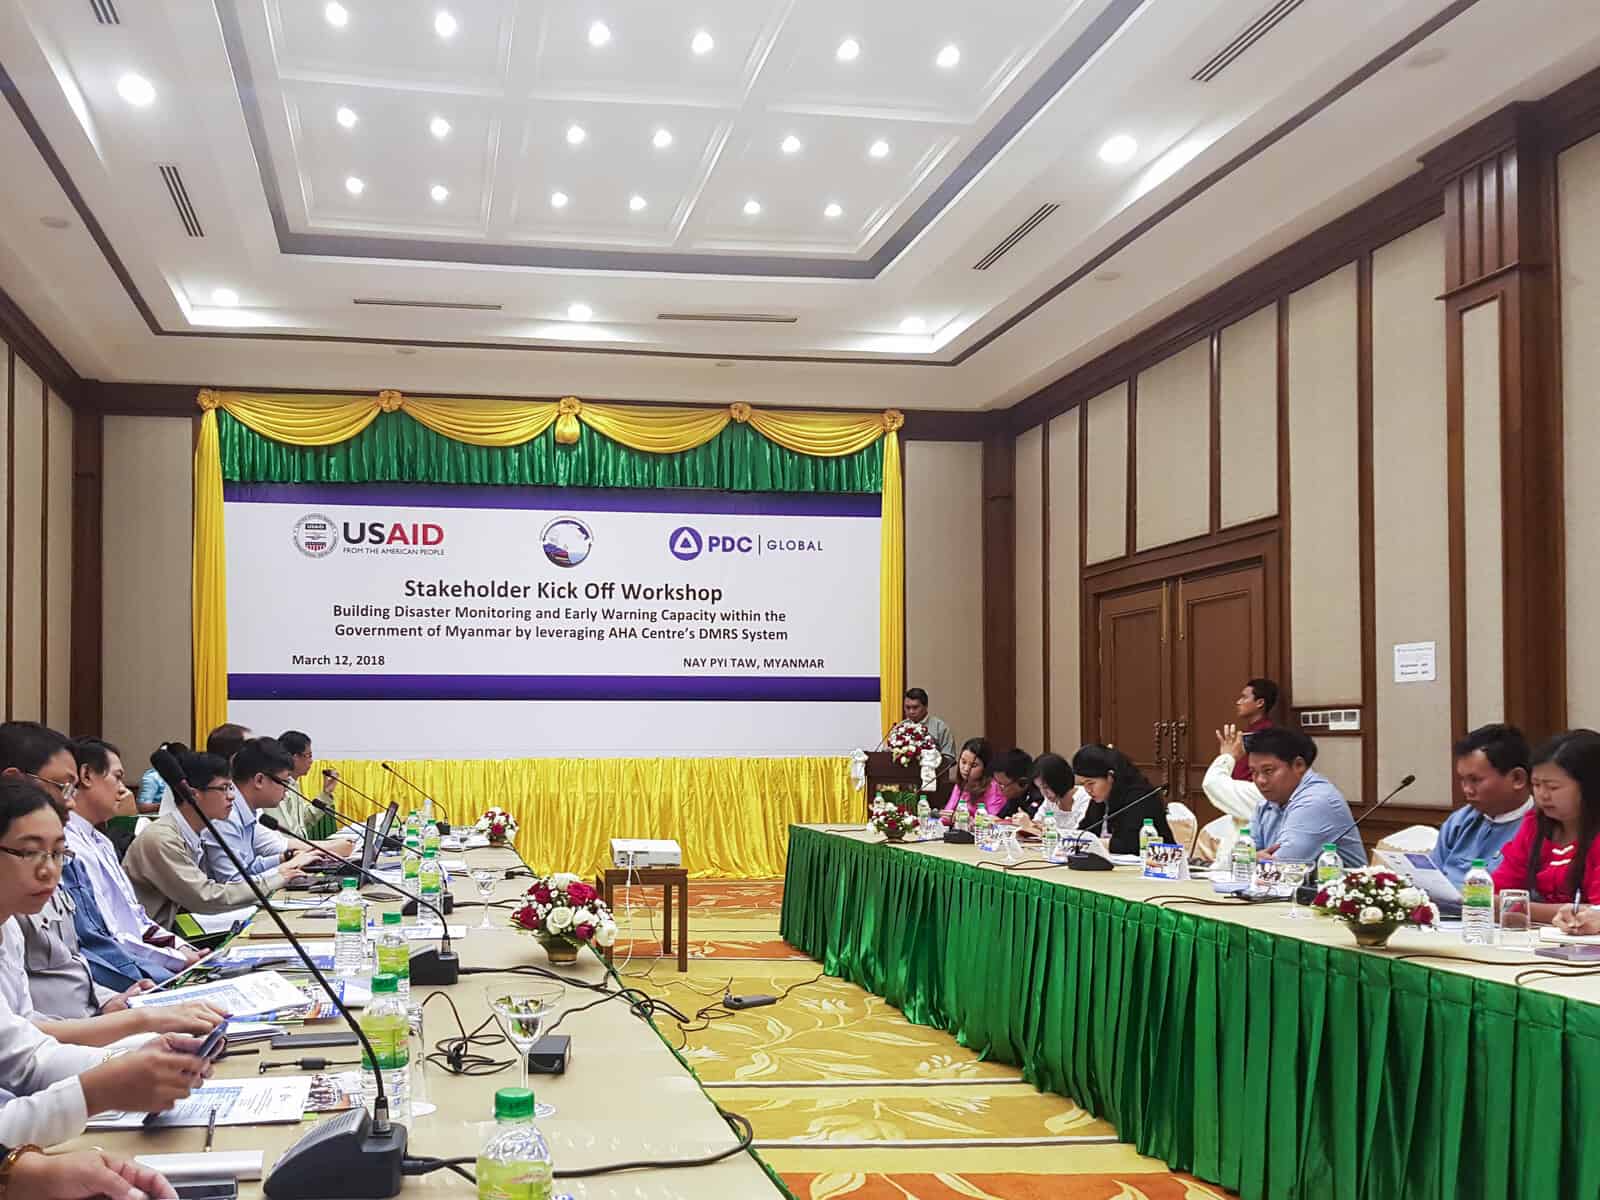 Key representatives of Myanmar’s Disaster Management Community convene for kick-off meeting in Nay Pyi Taw with PDC, USAID/OFDA, and AHA Centre.